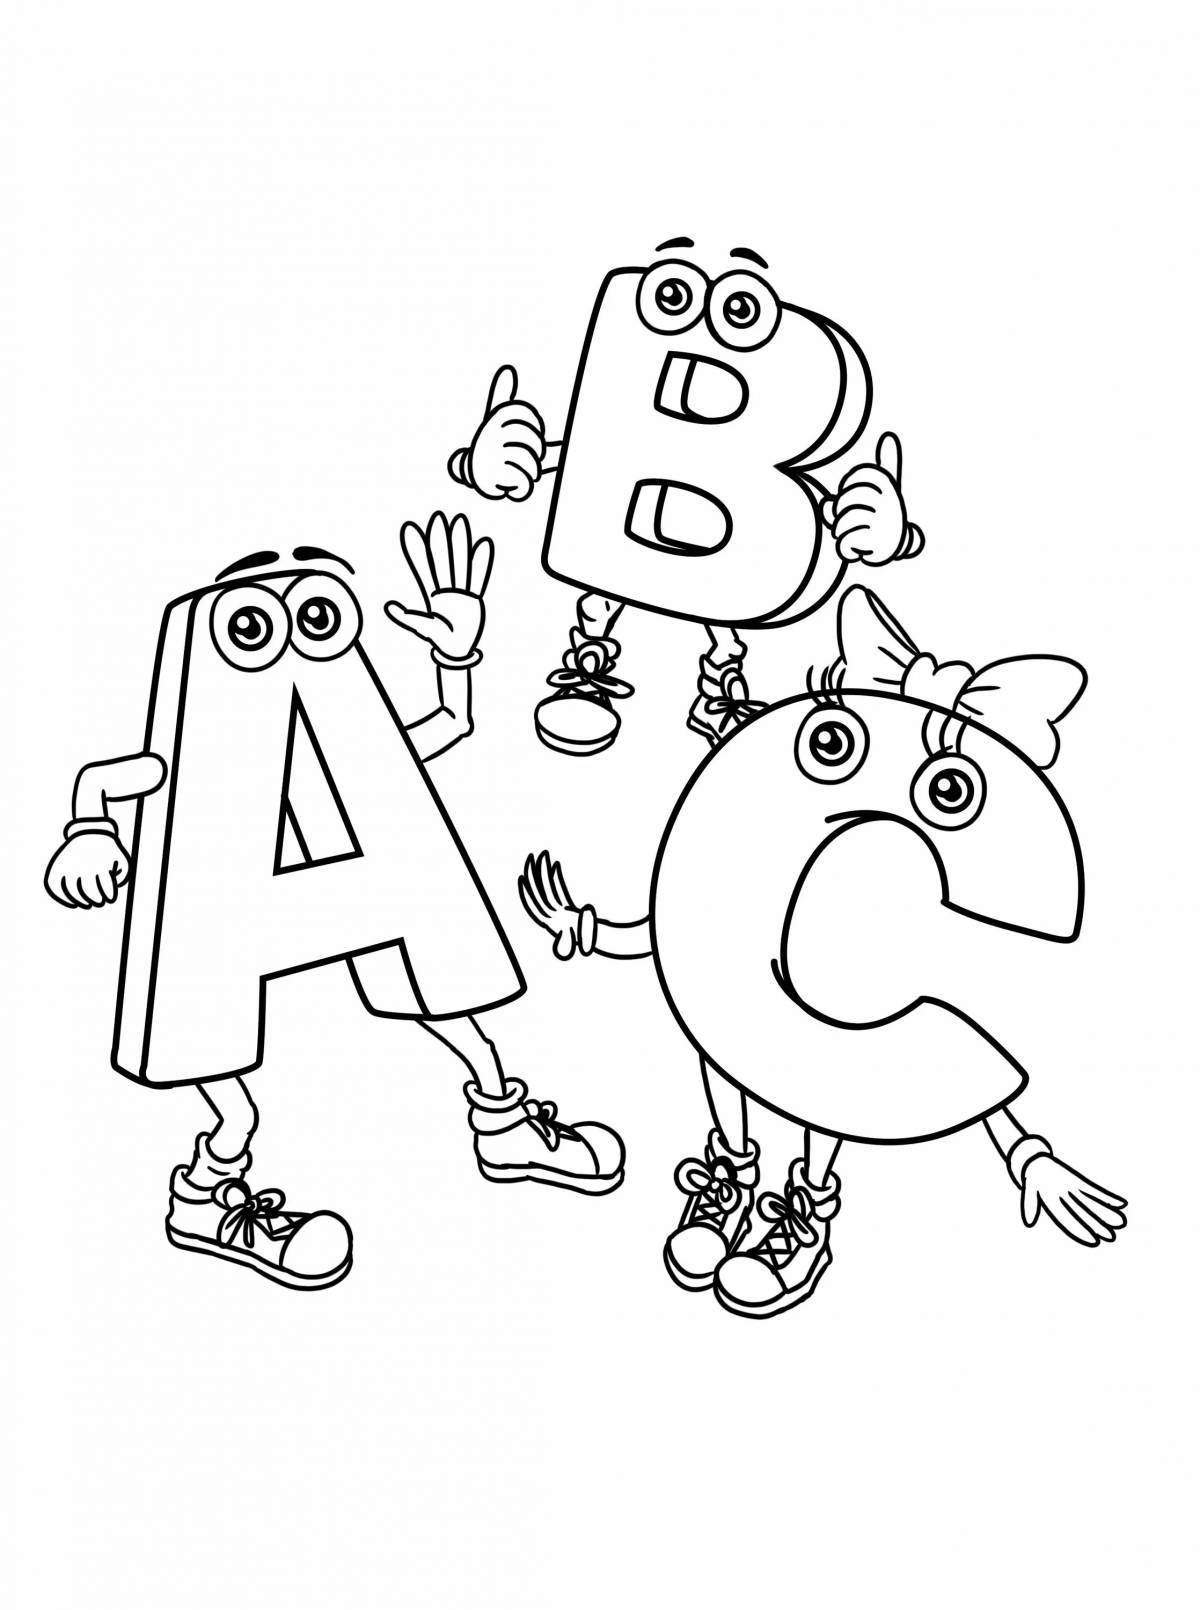 Bright abc coloring page